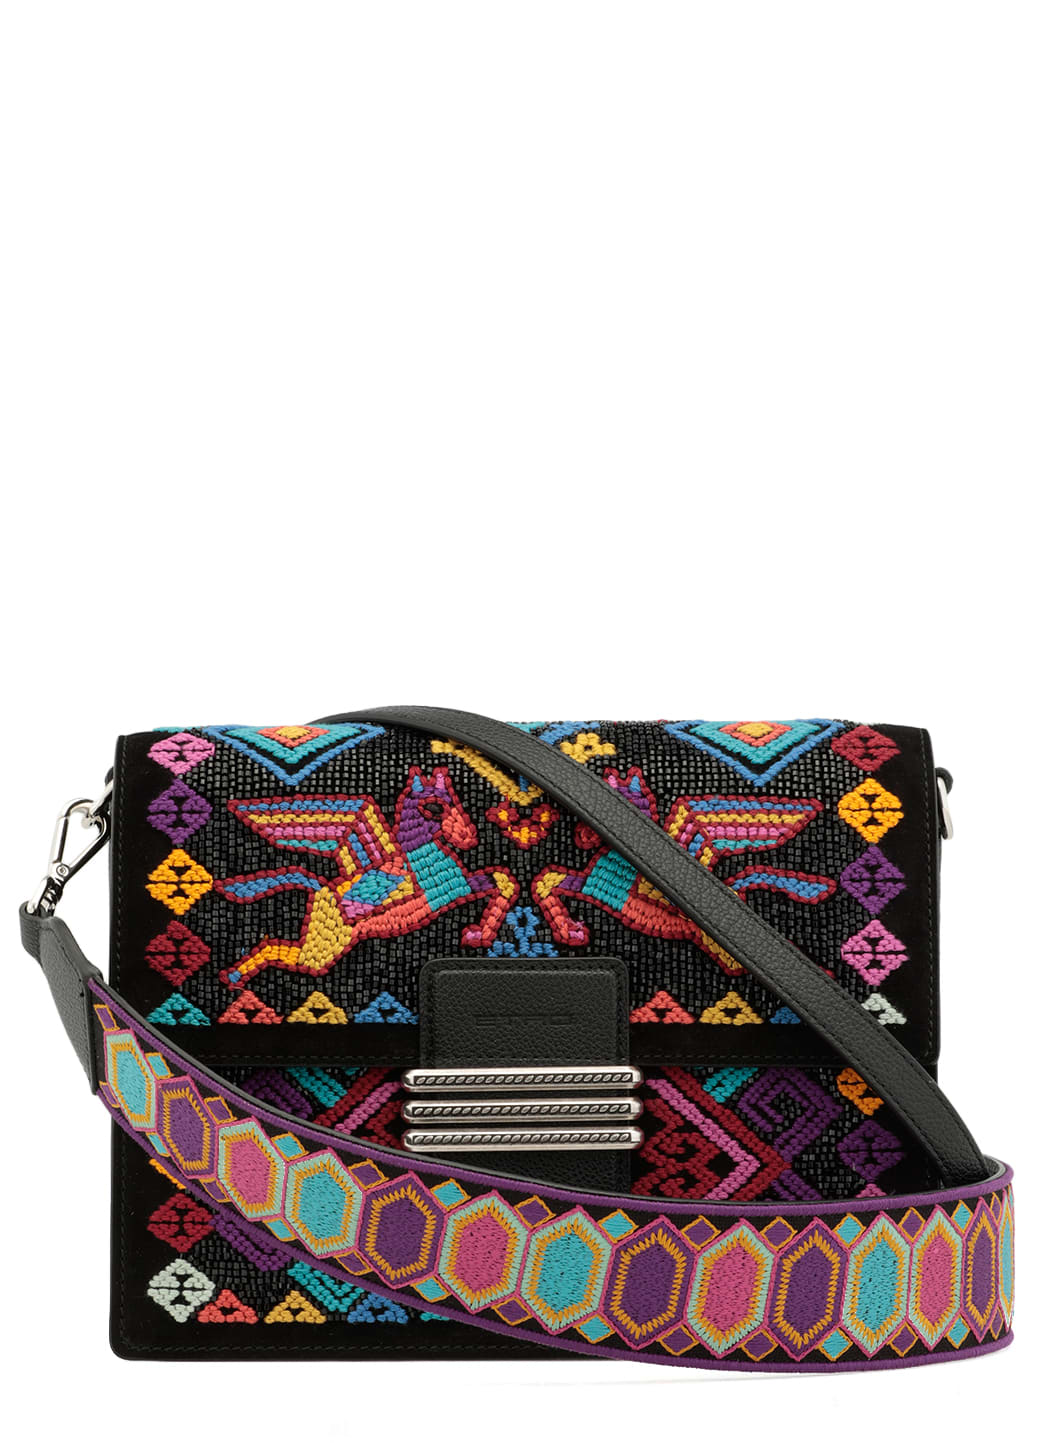 Etro Rainbow Shoulder Bag With Embroidery In Black